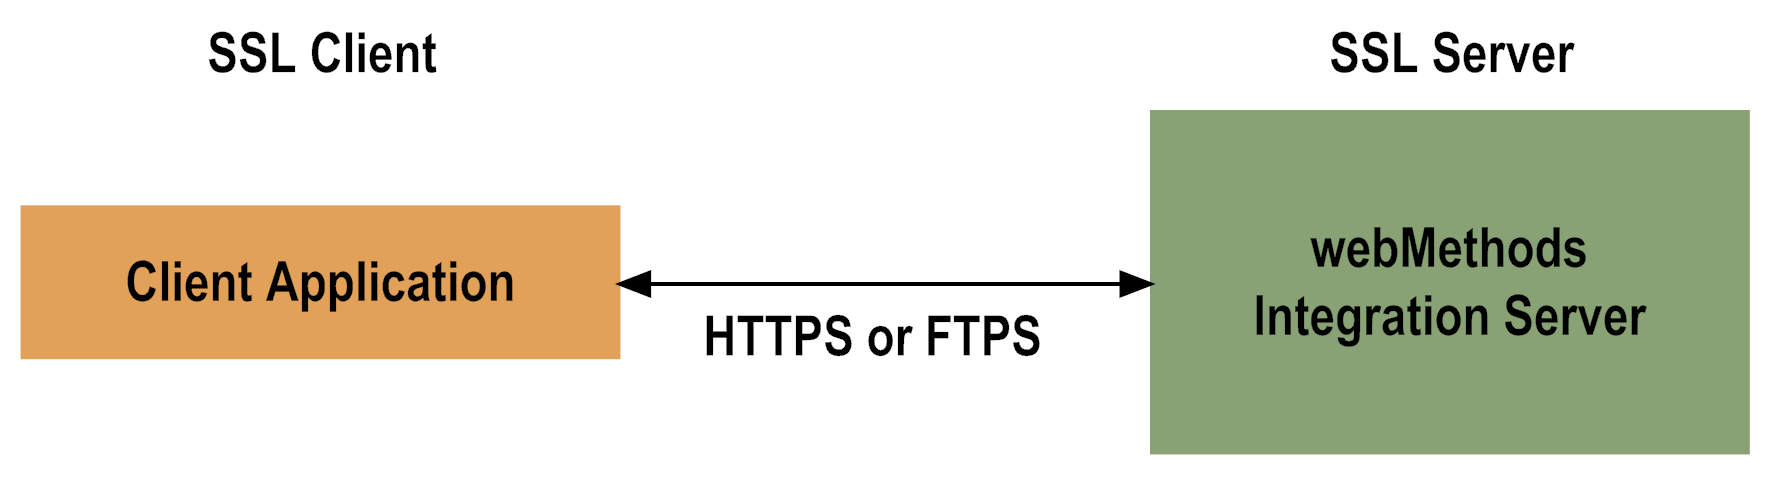 The following figure shows Integration Server acting as an SSL server